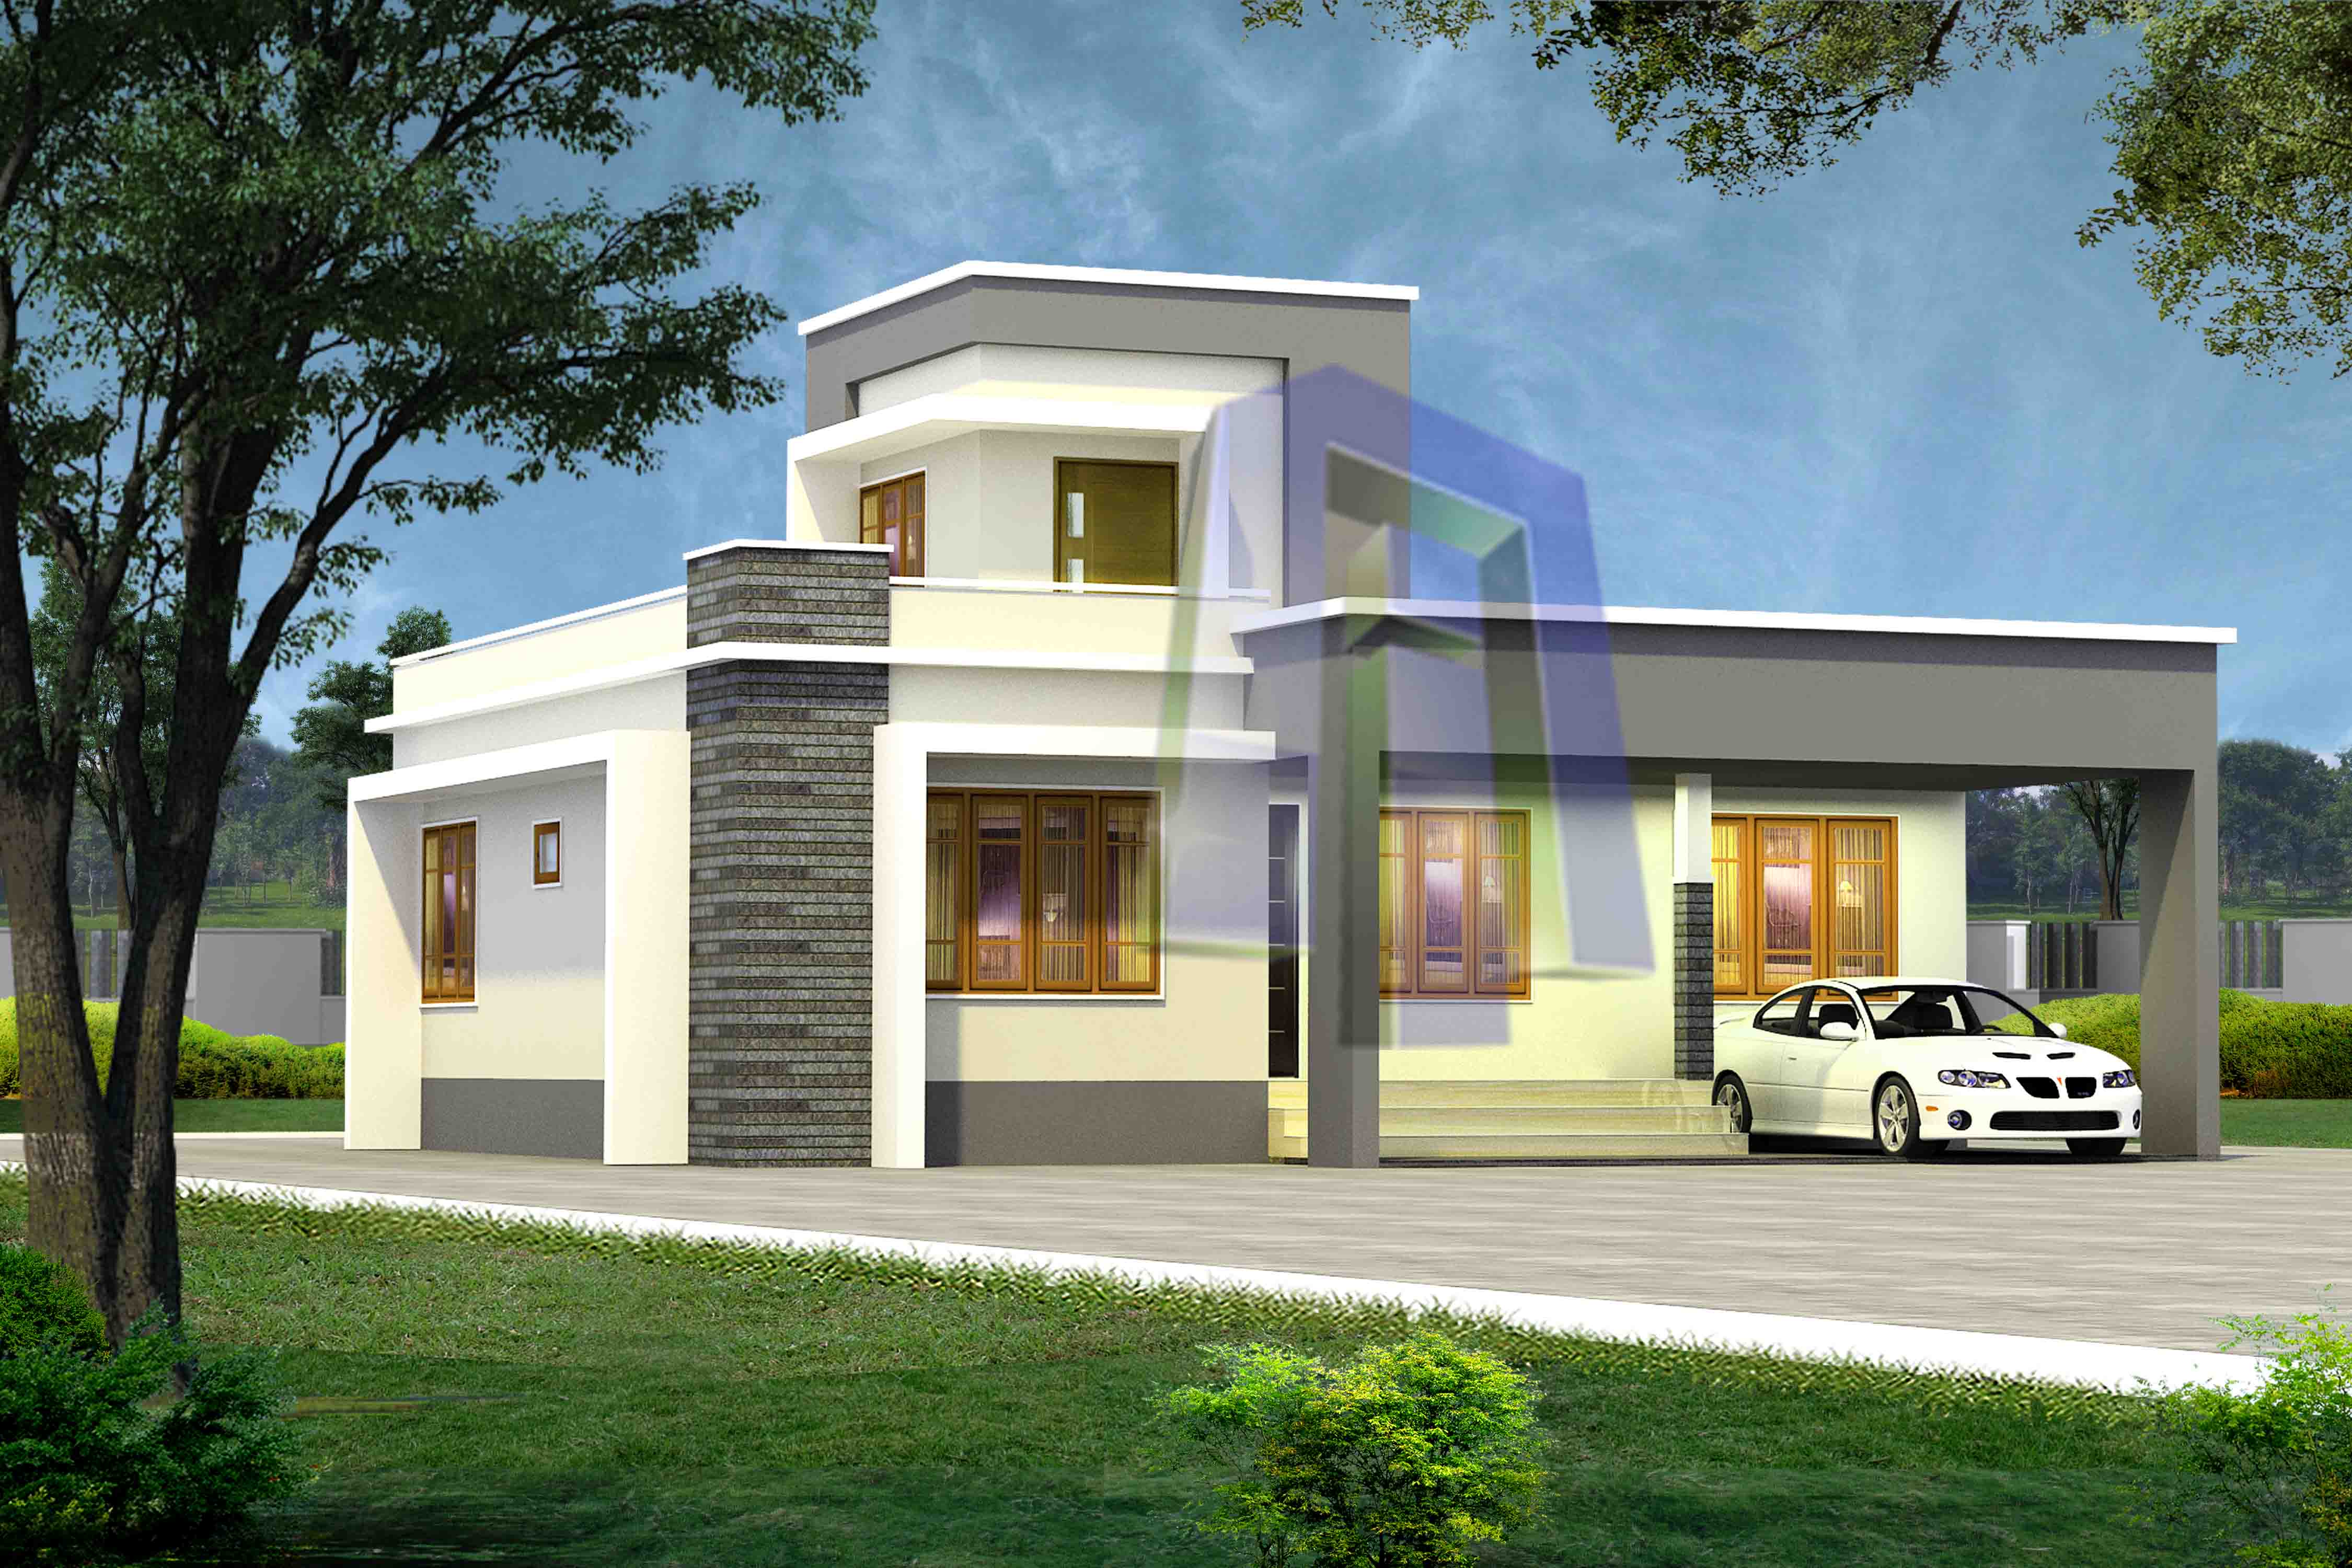 2 Bedroom House Plan Indian Style 1000 Sq Ft House Plans With Front Elevation Kerala Style House Plans Kerala Home Plans Kerala House Design Indian House Plans